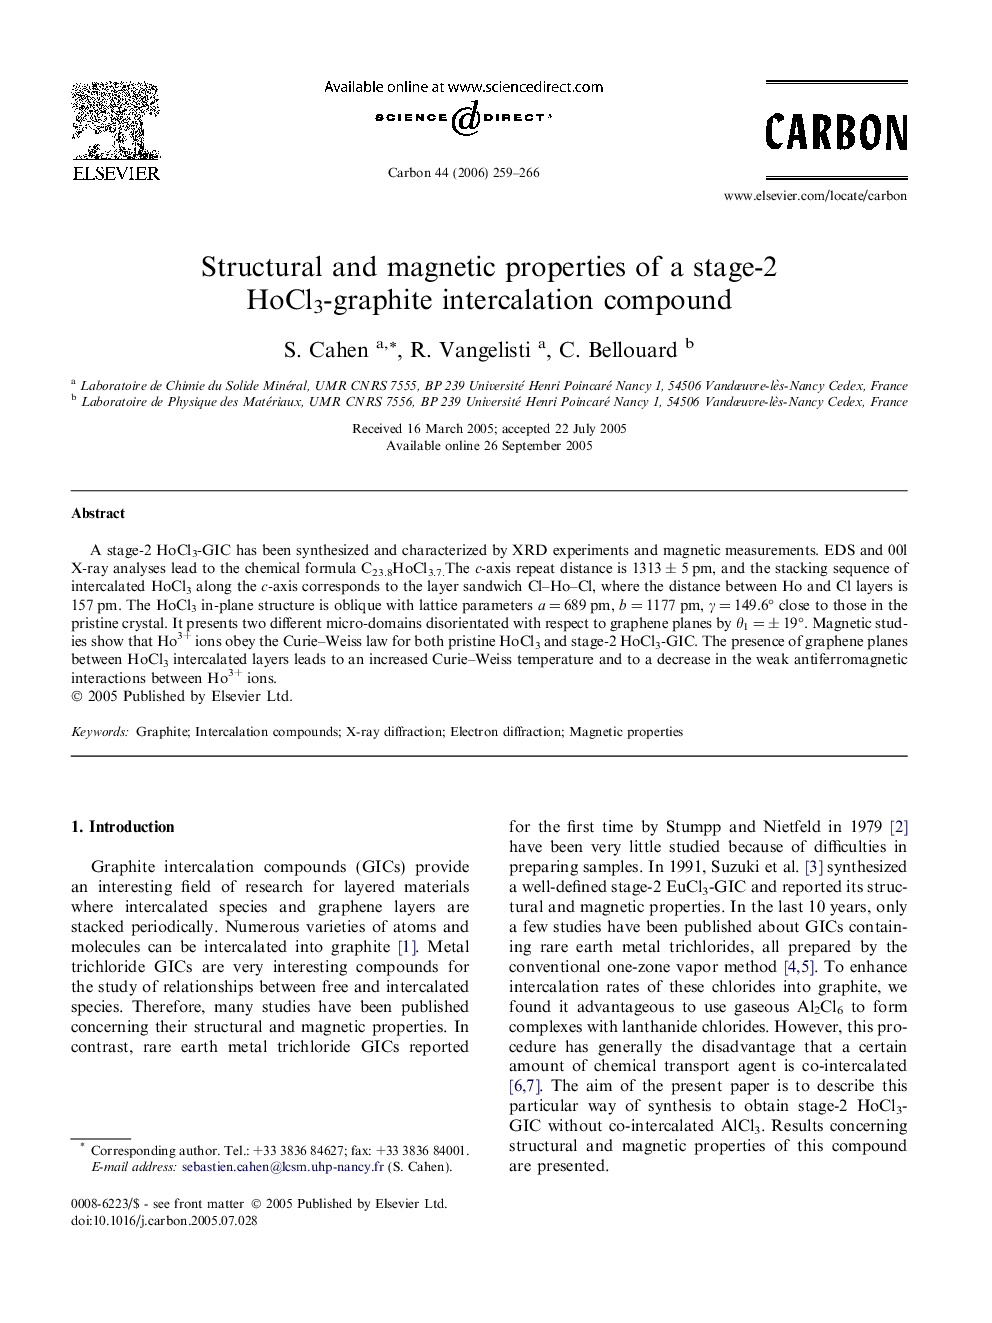 Structural and magnetic properties of a stage-2 HoCl3-graphite intercalation compound